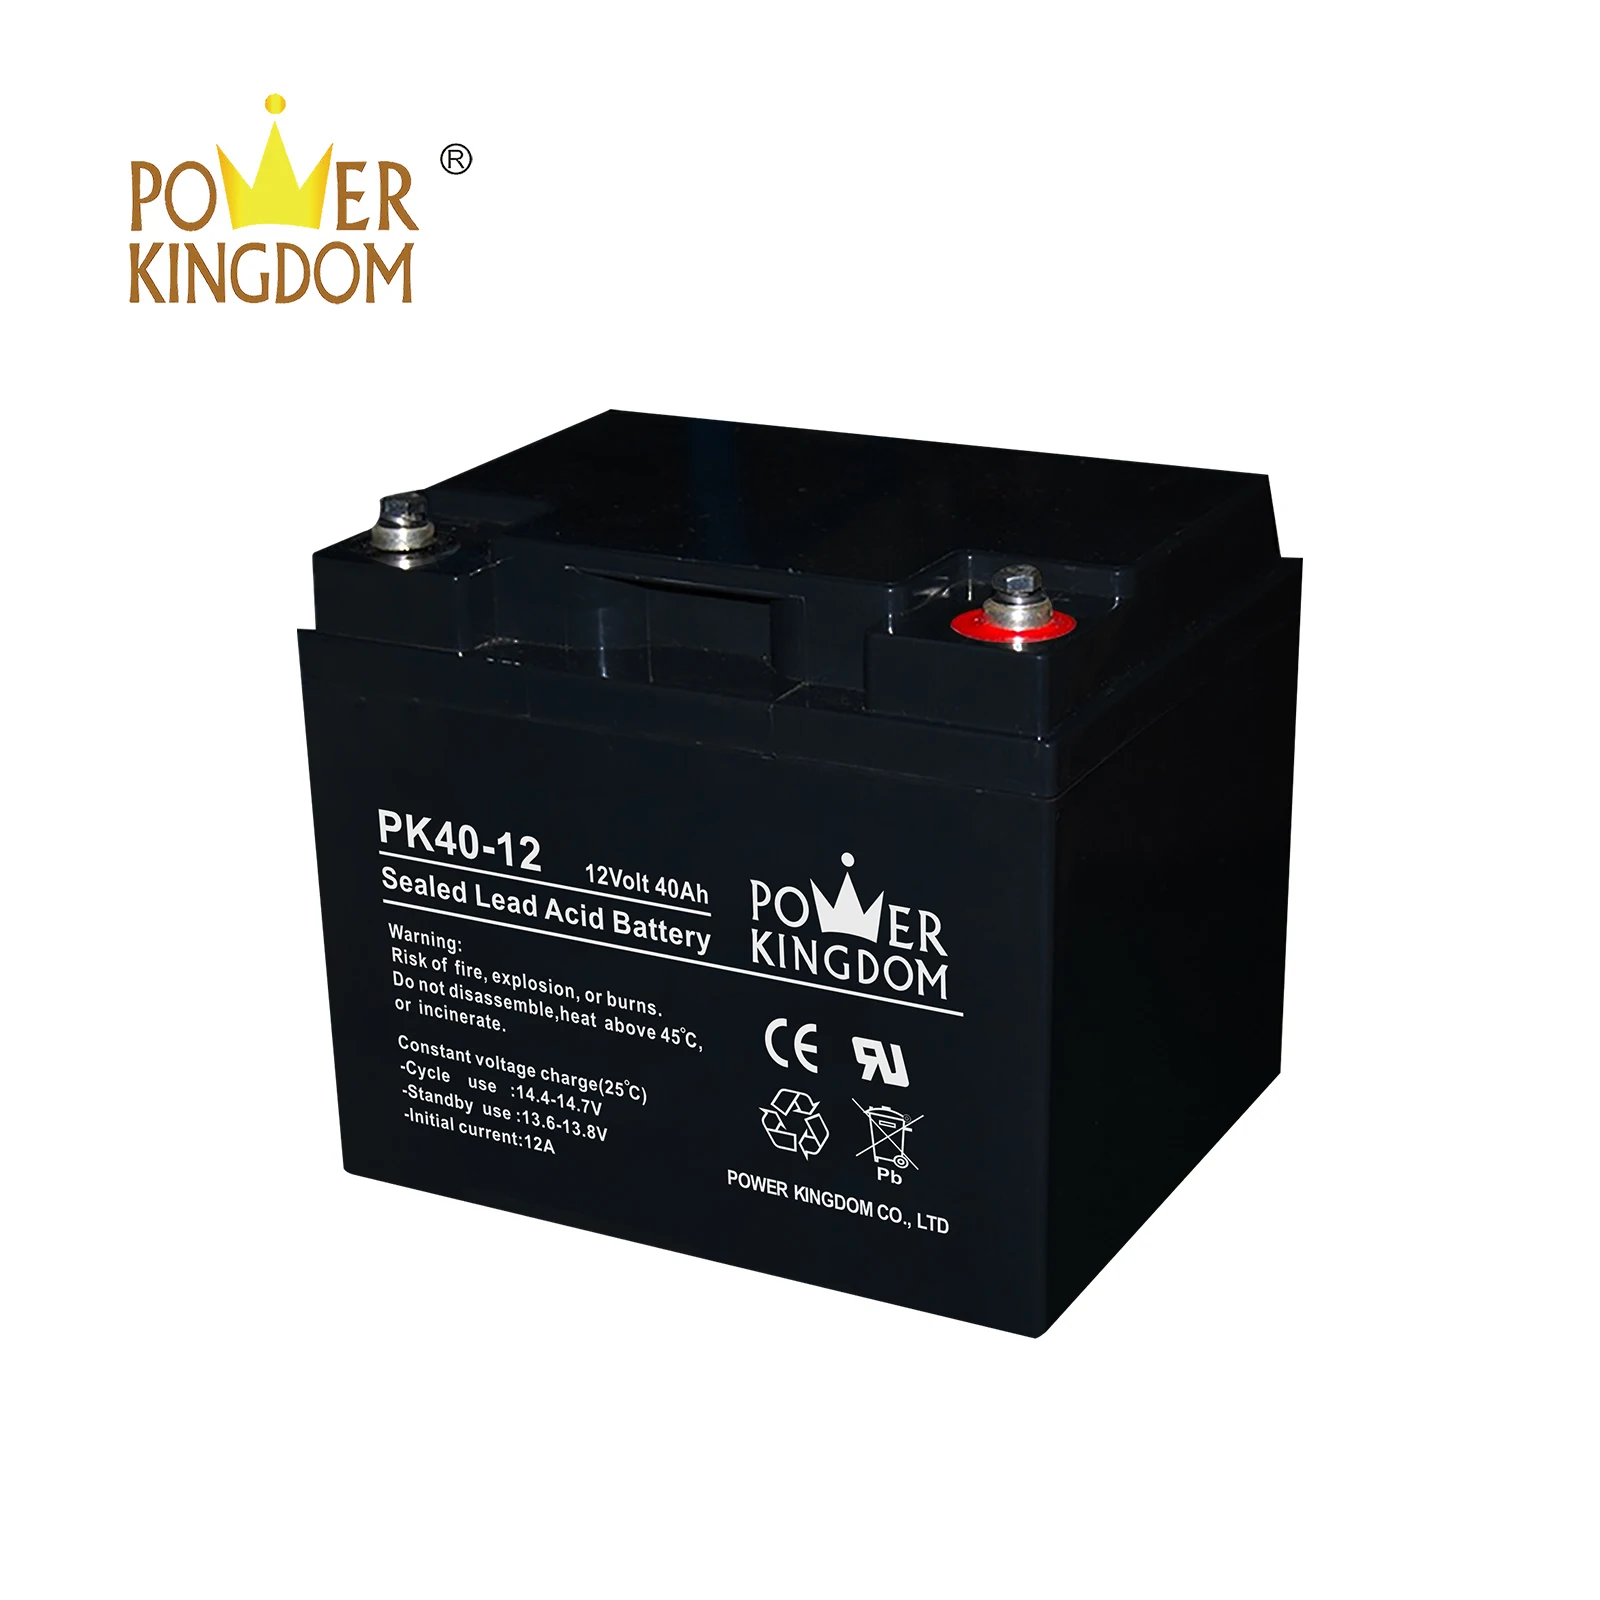 Power Kingdom High-quality flooded cell battery from China